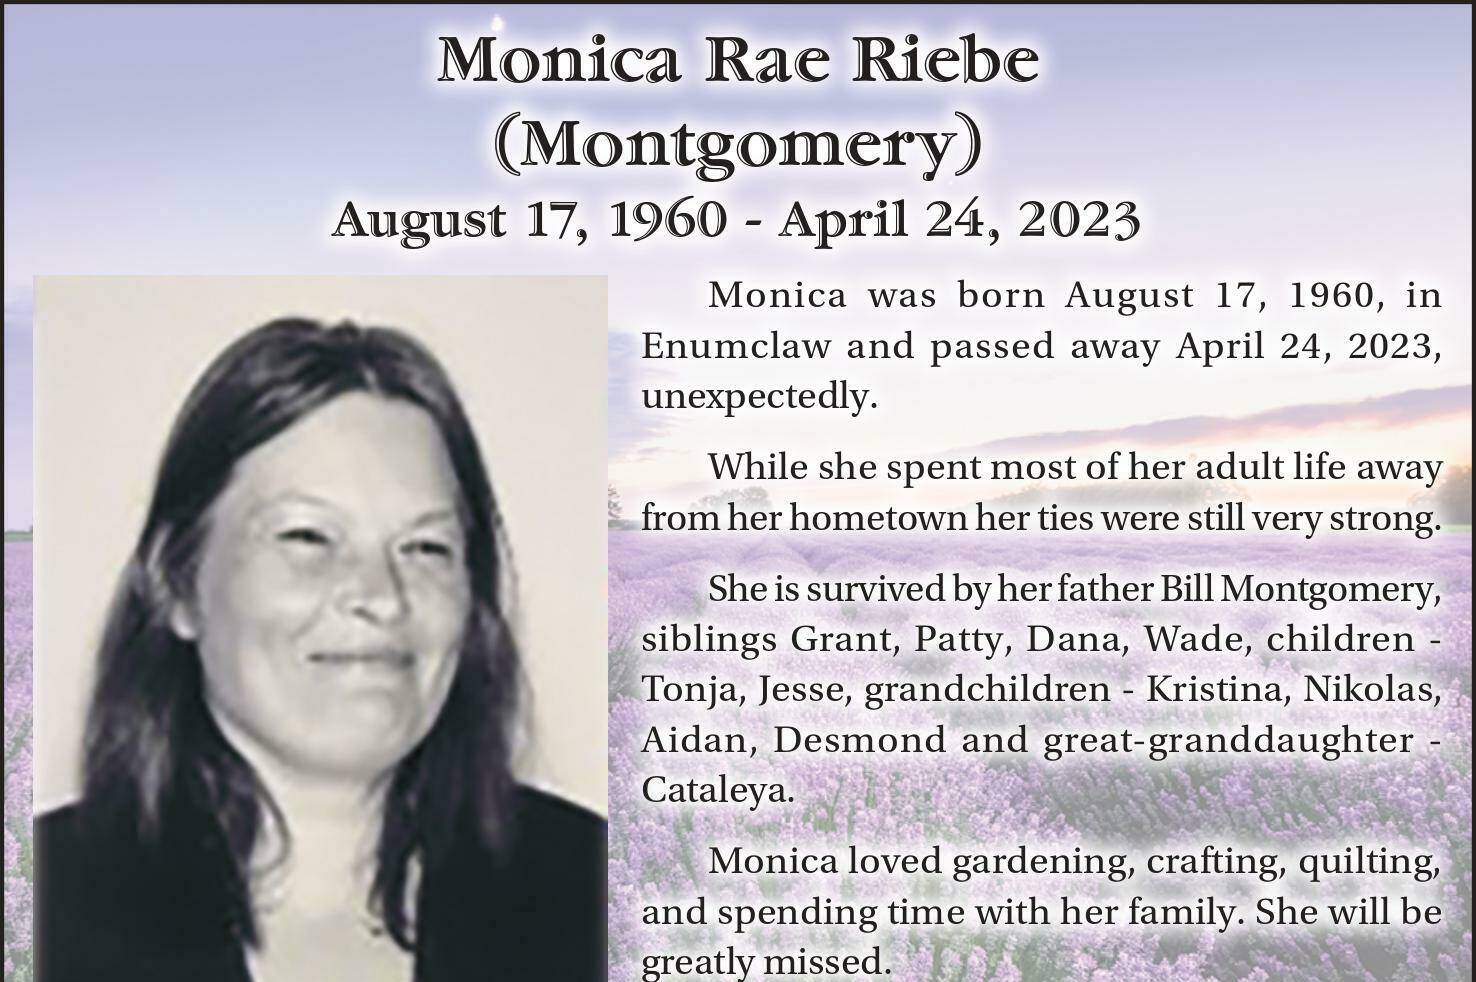 Monica Rae Riebe died April 24, 2023 at the age of 62.